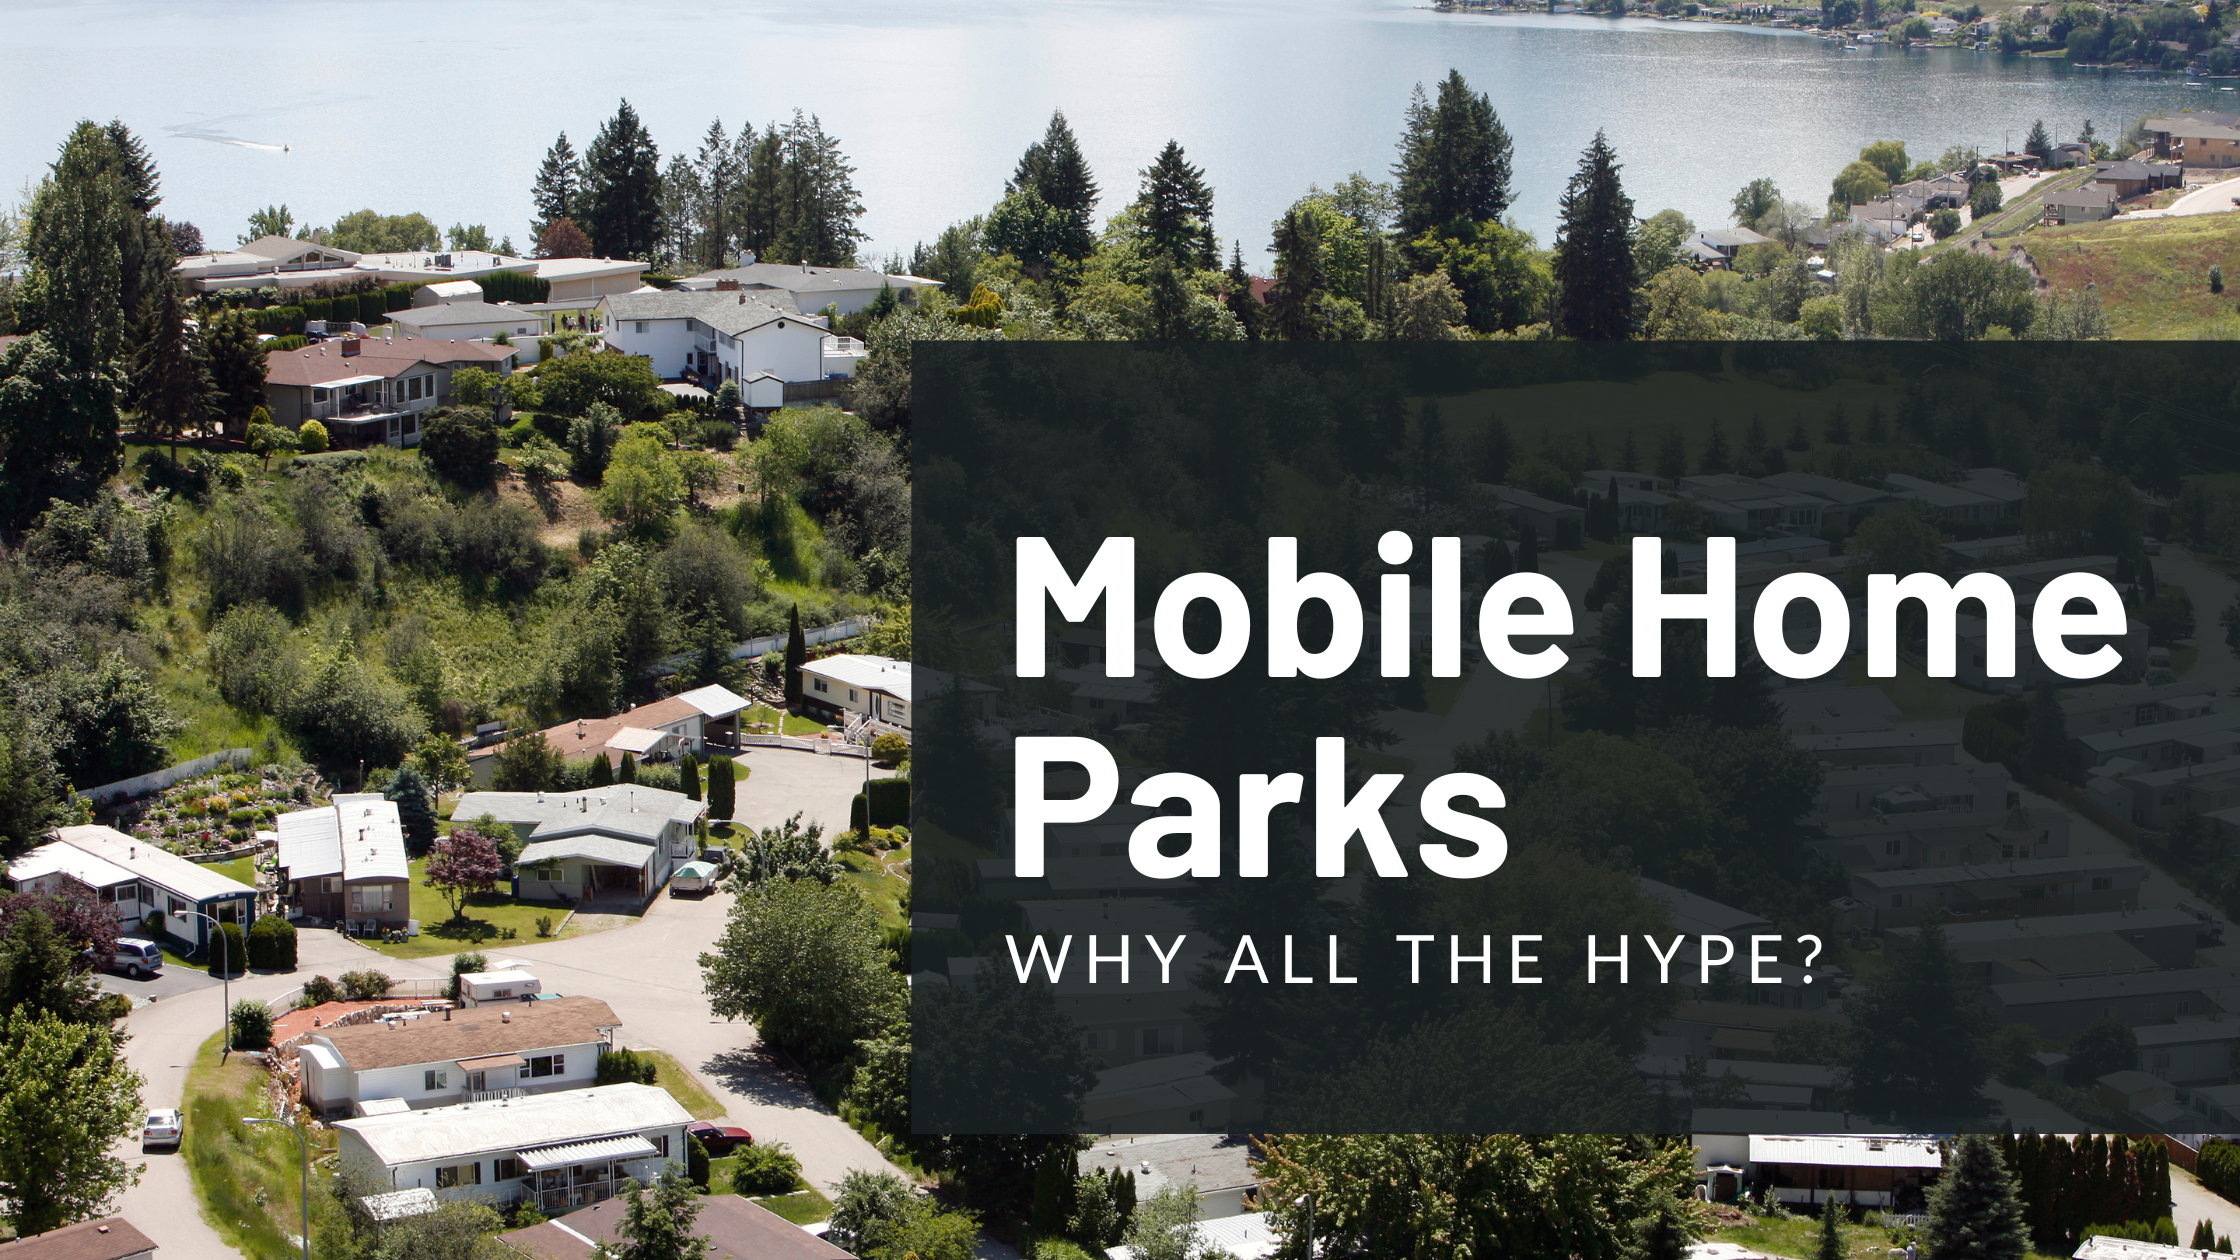 Mobile Home Parks - Why All The Hype?